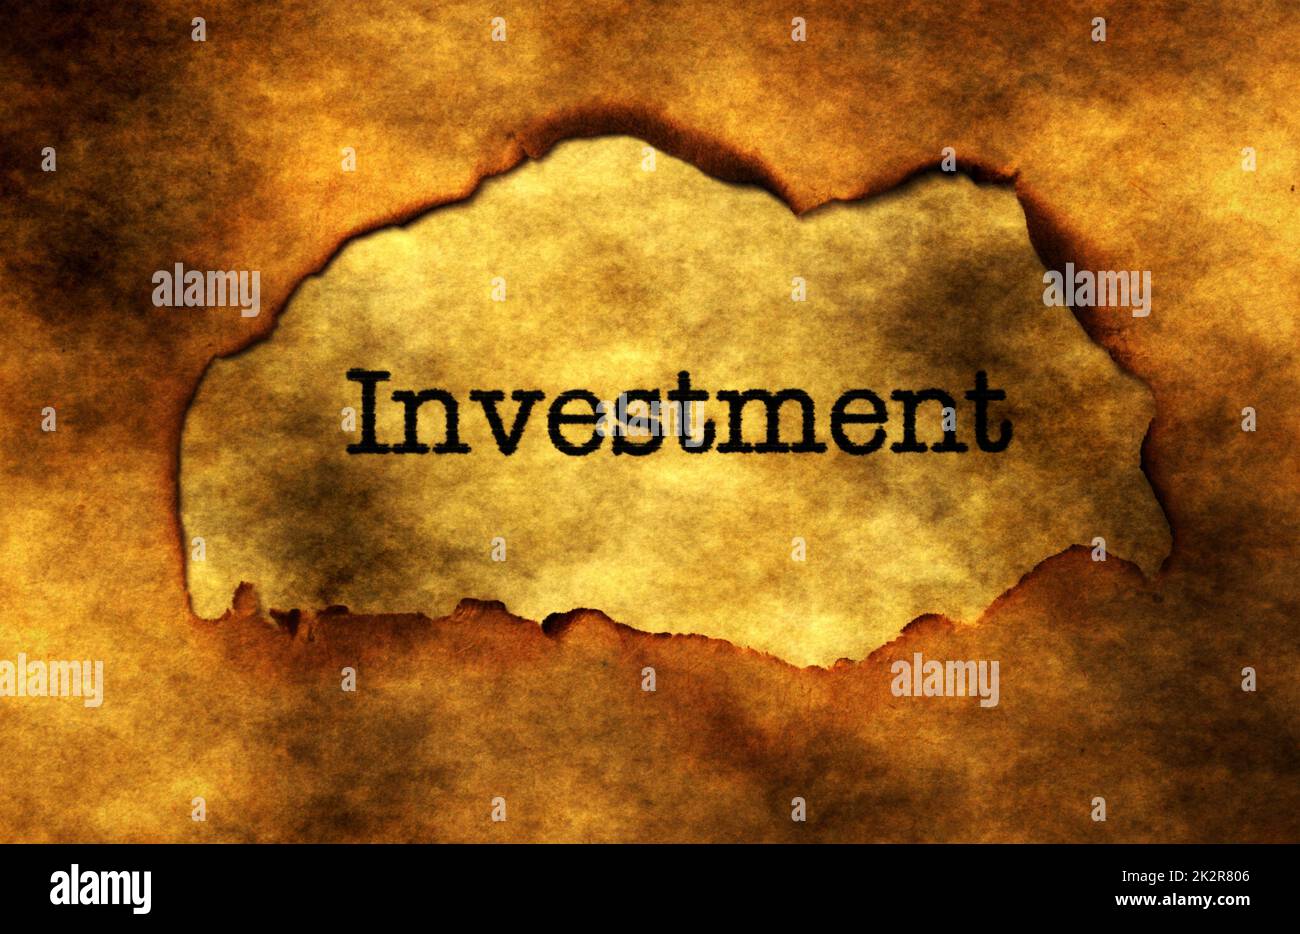 Investment grunge concept Stock Photo